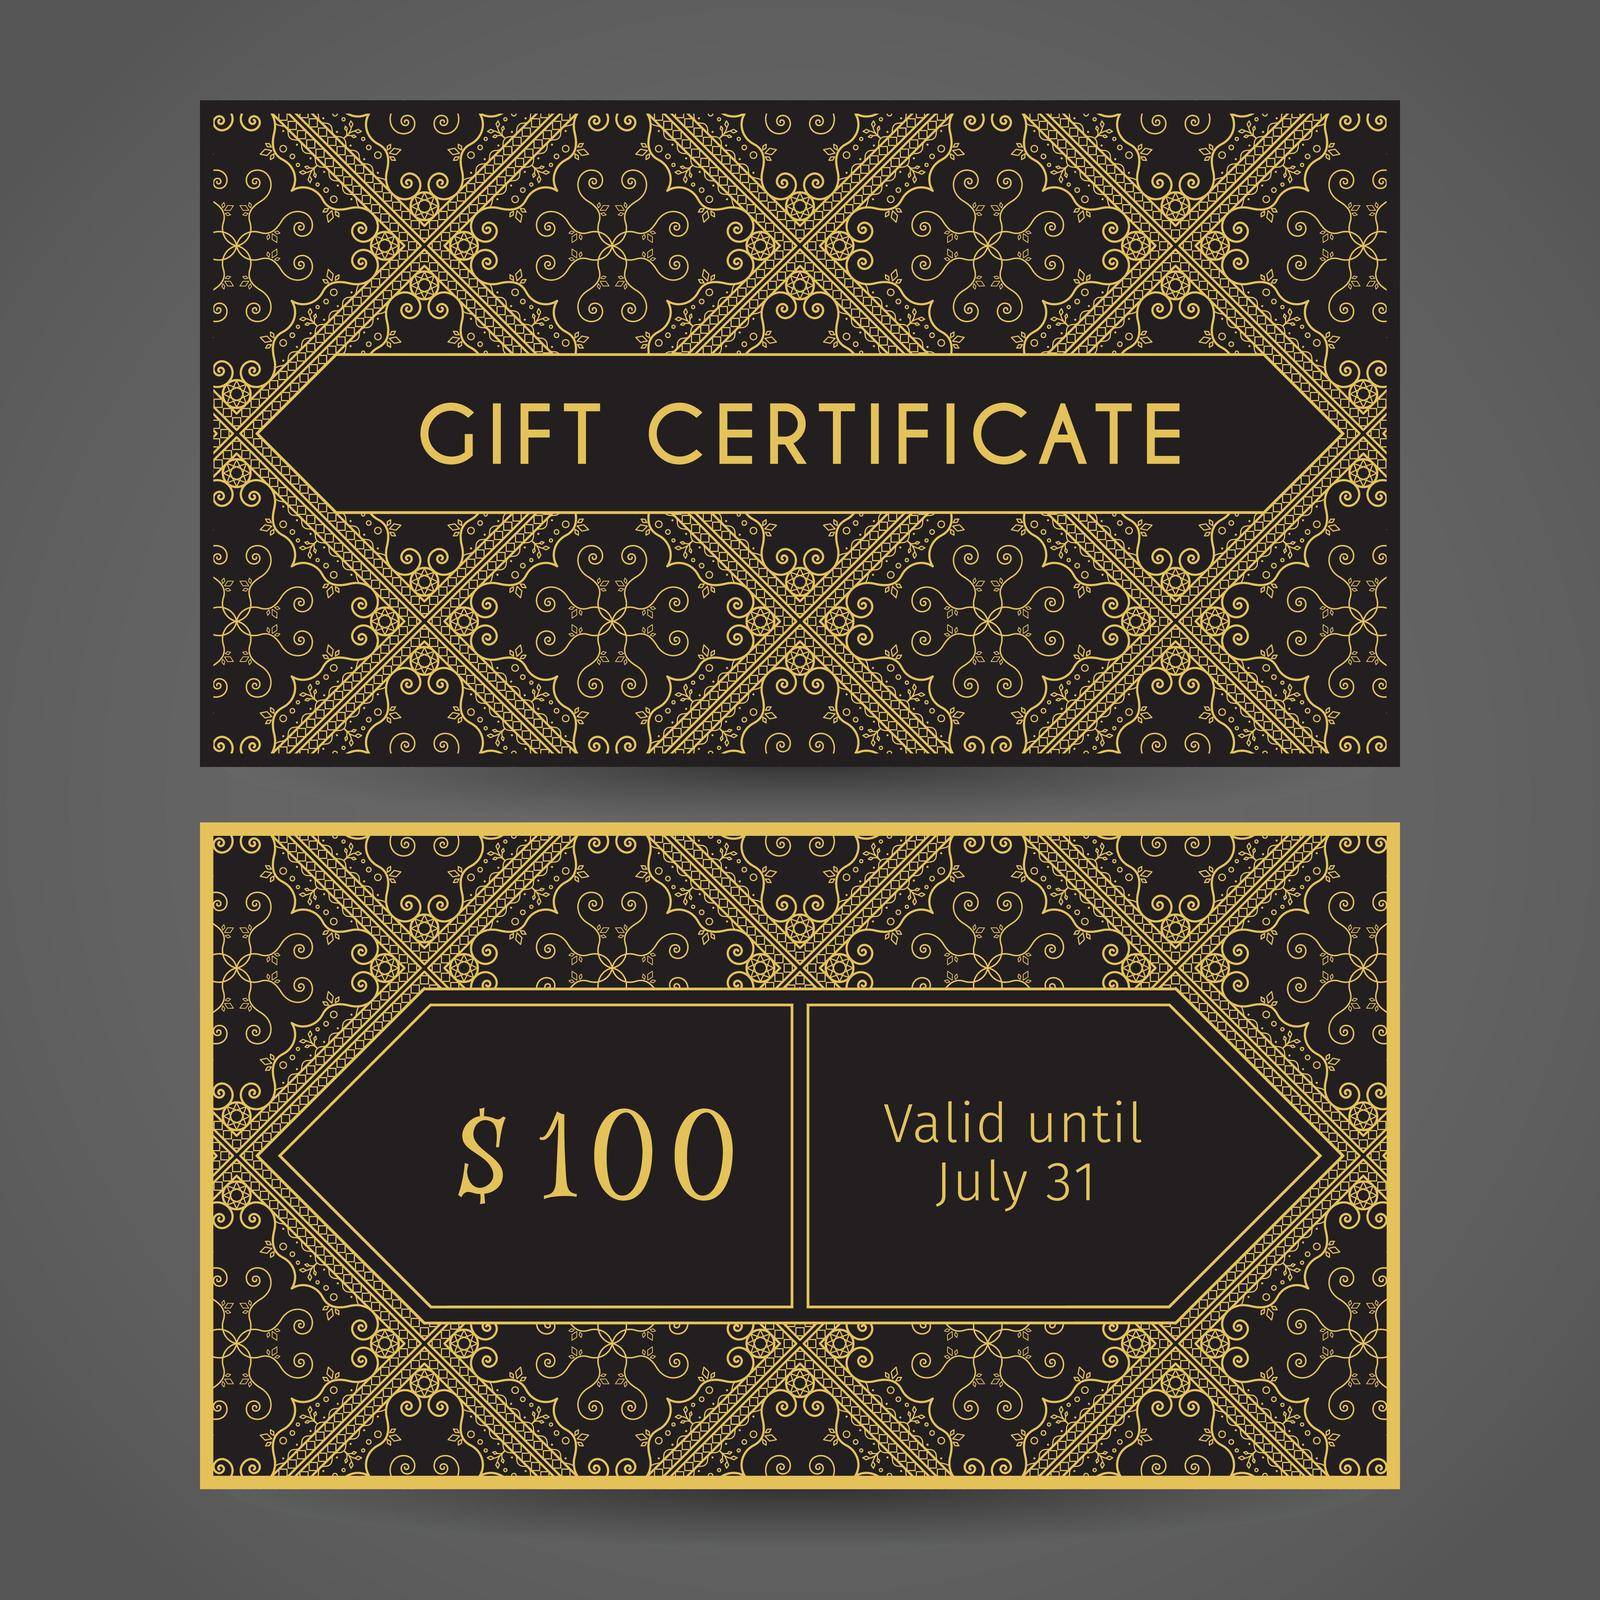 Vintage Gift Certificate by dacascas